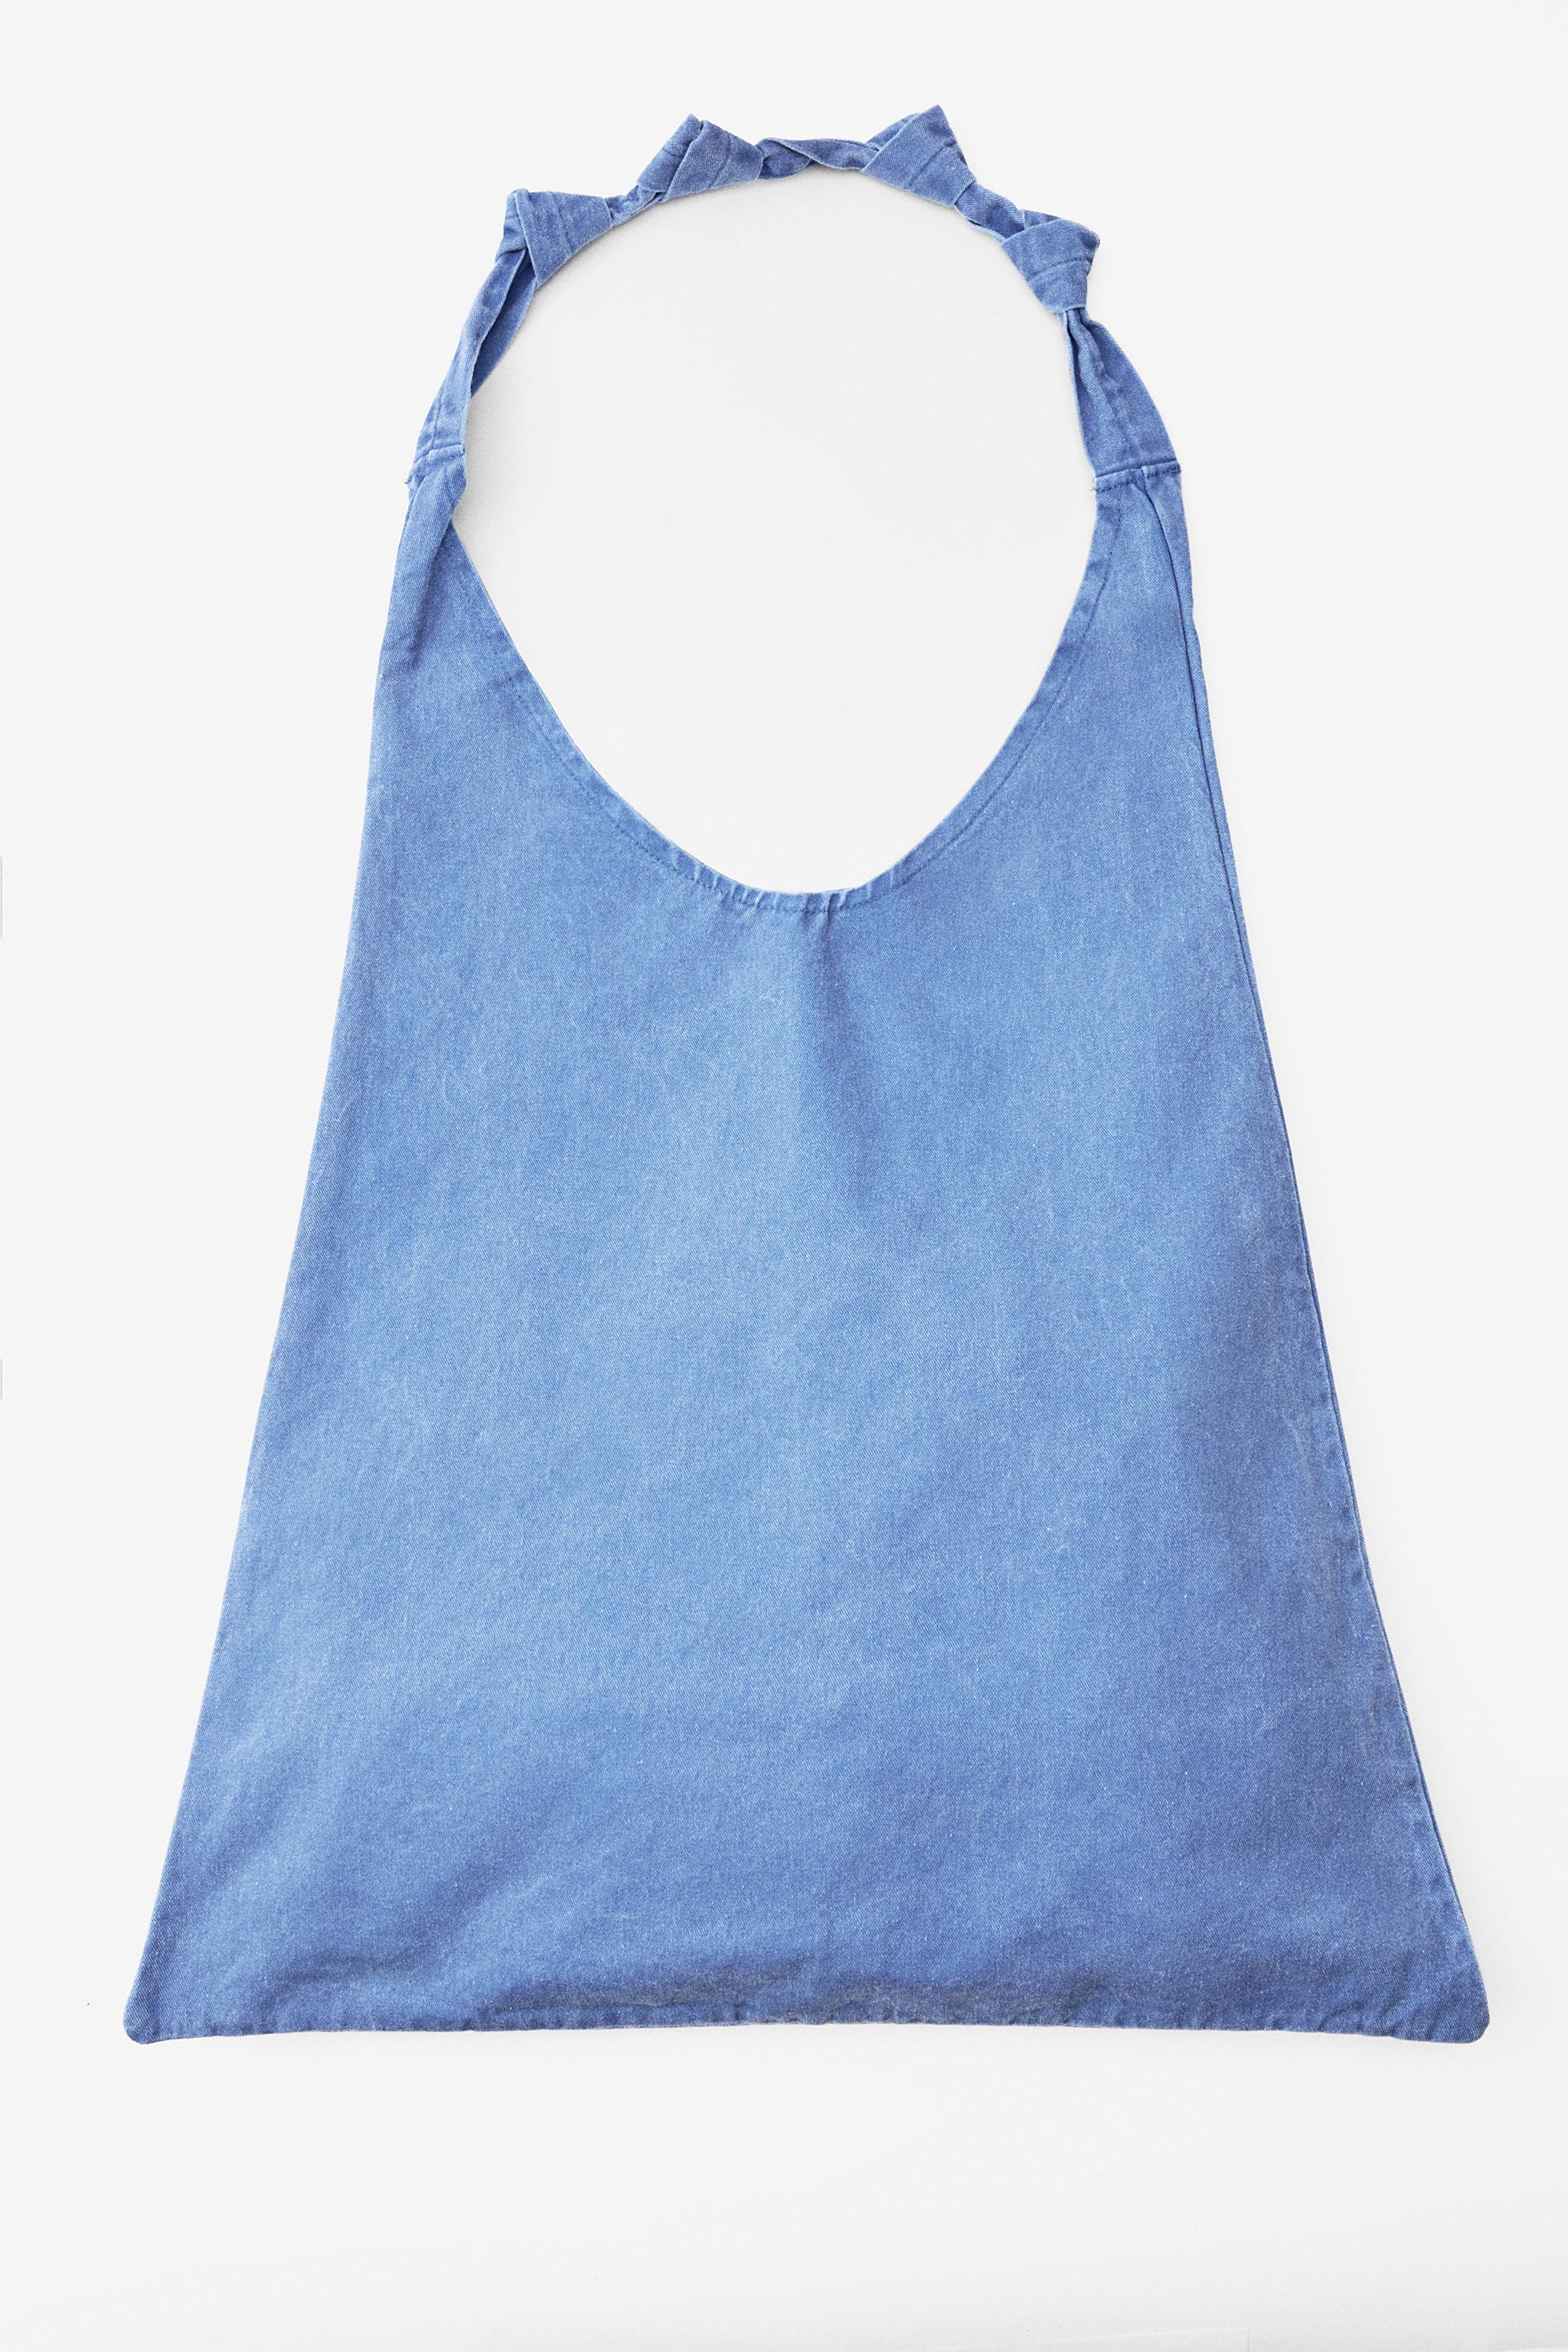 KNOTTED CANVAS BAG - Blue | ZARA United States